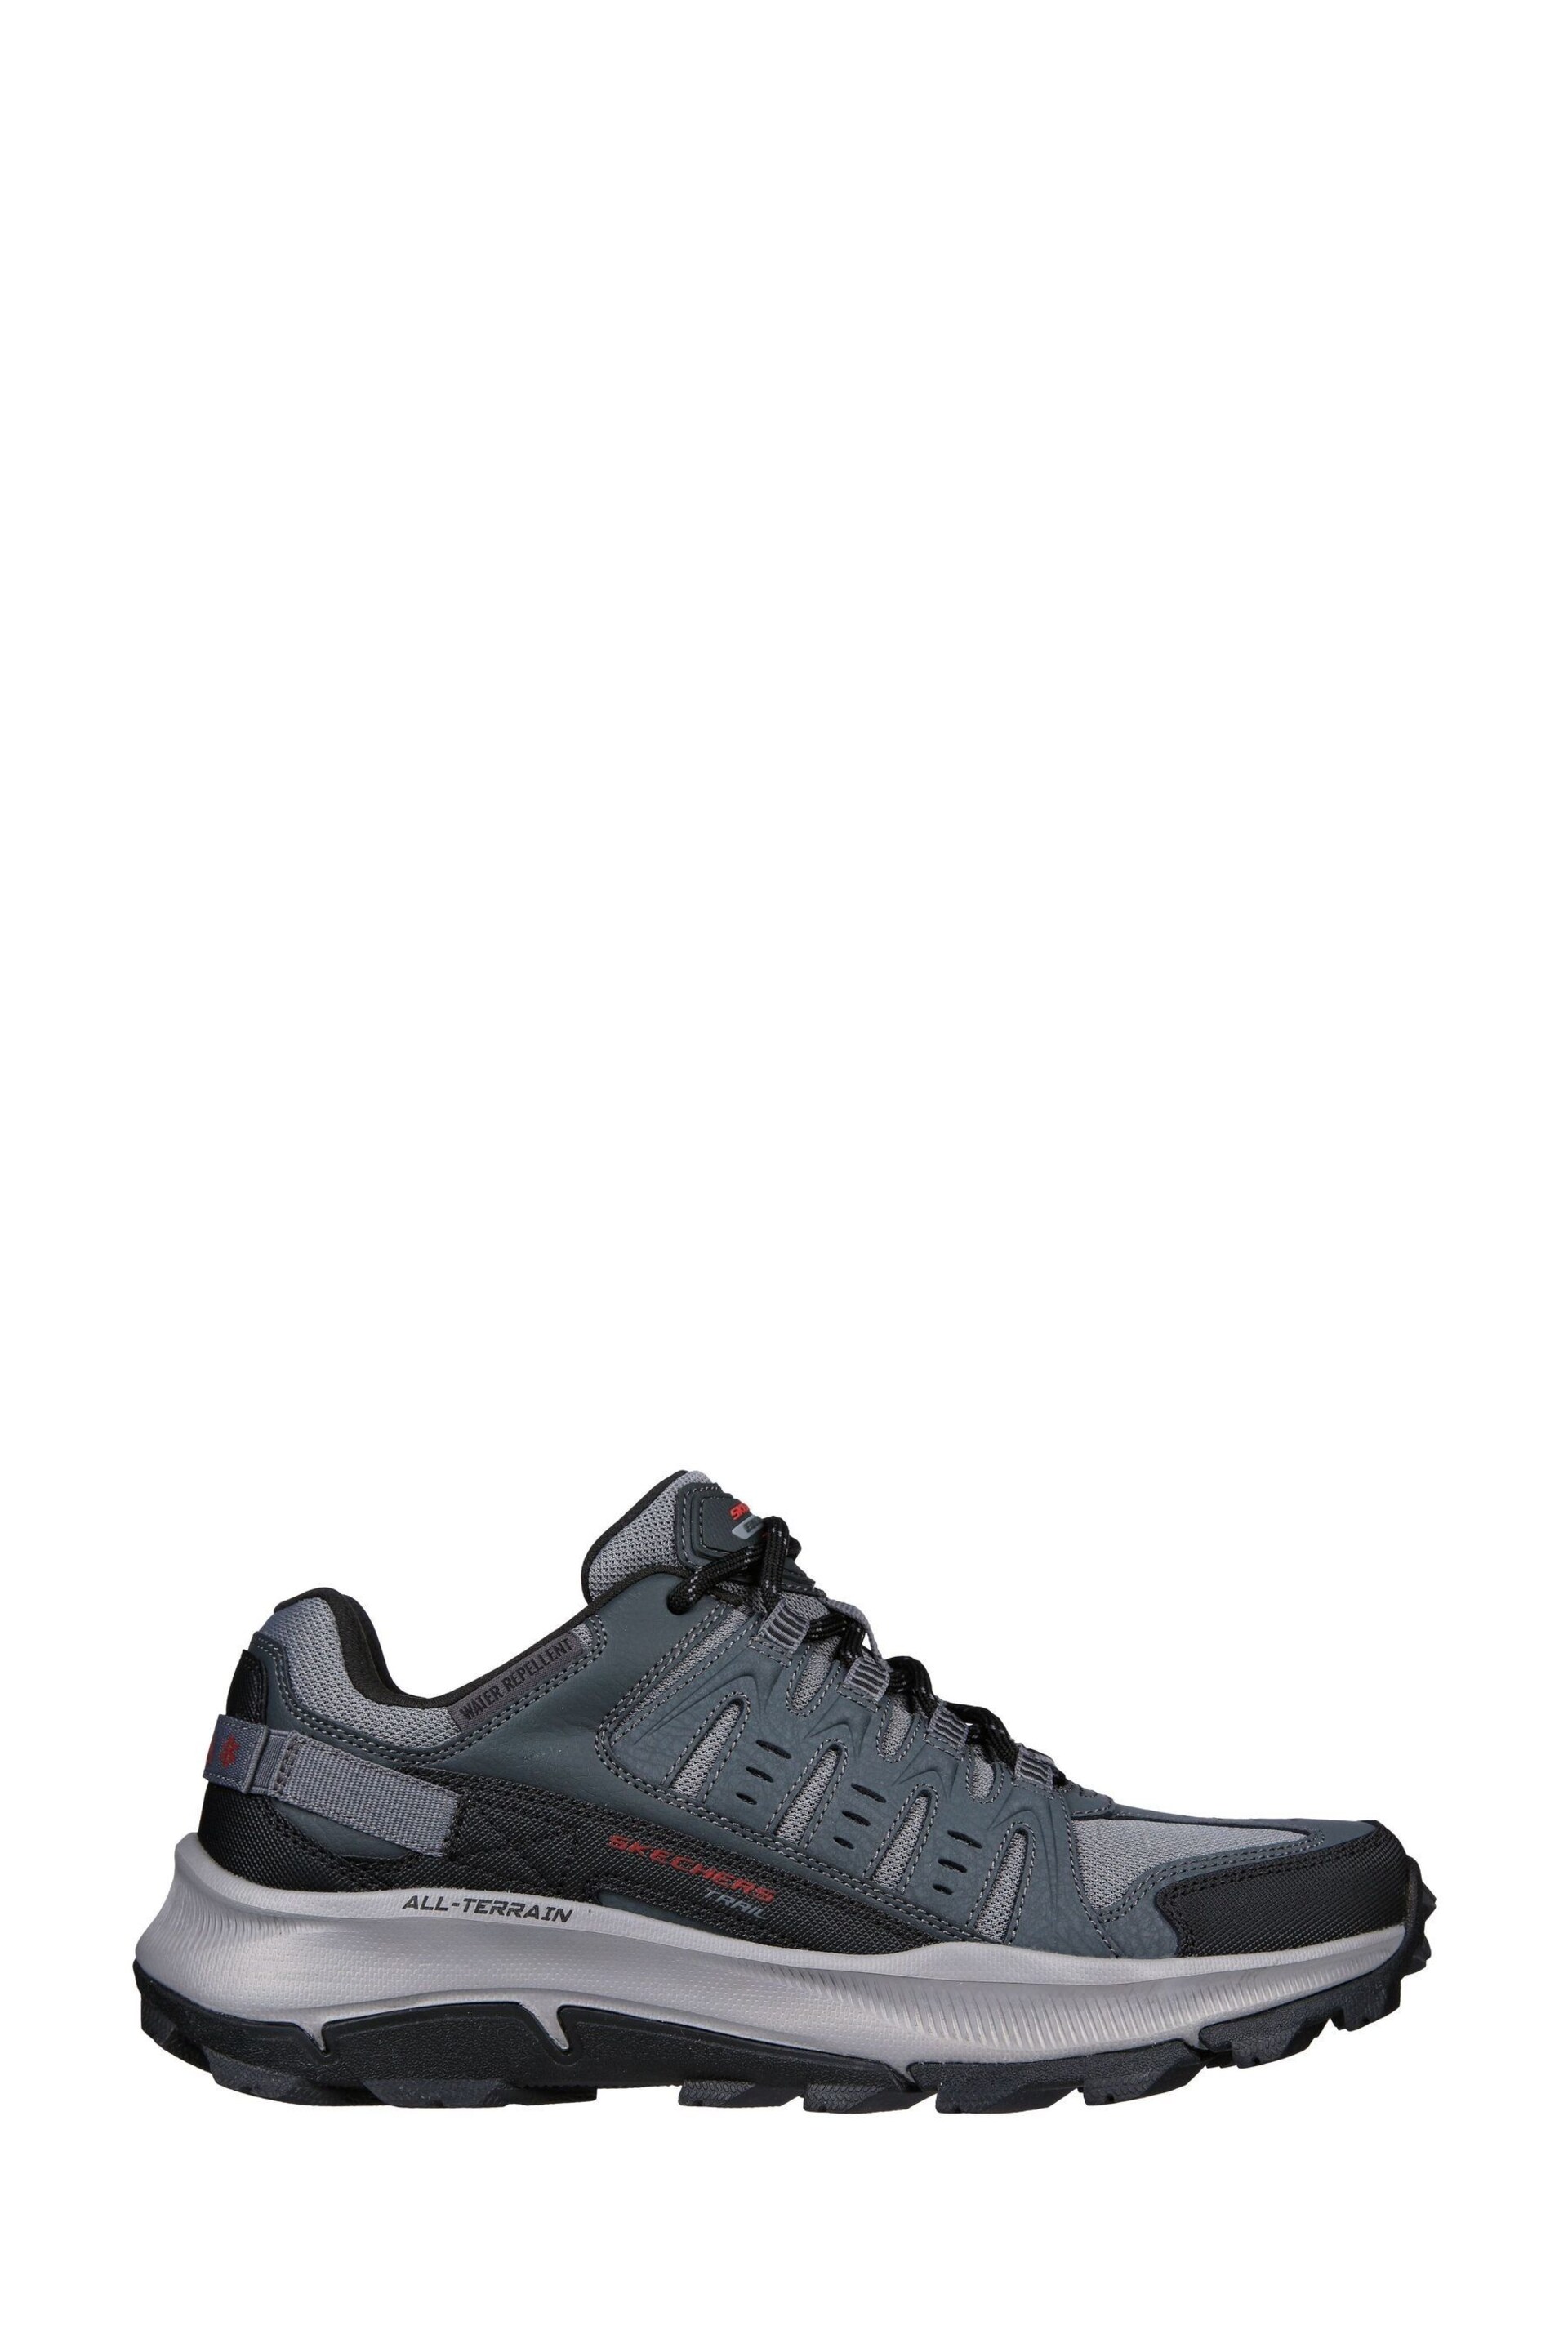 Skechers Grey Equalizer 5.0 Solix Trail Running Trainers - Image 1 of 5